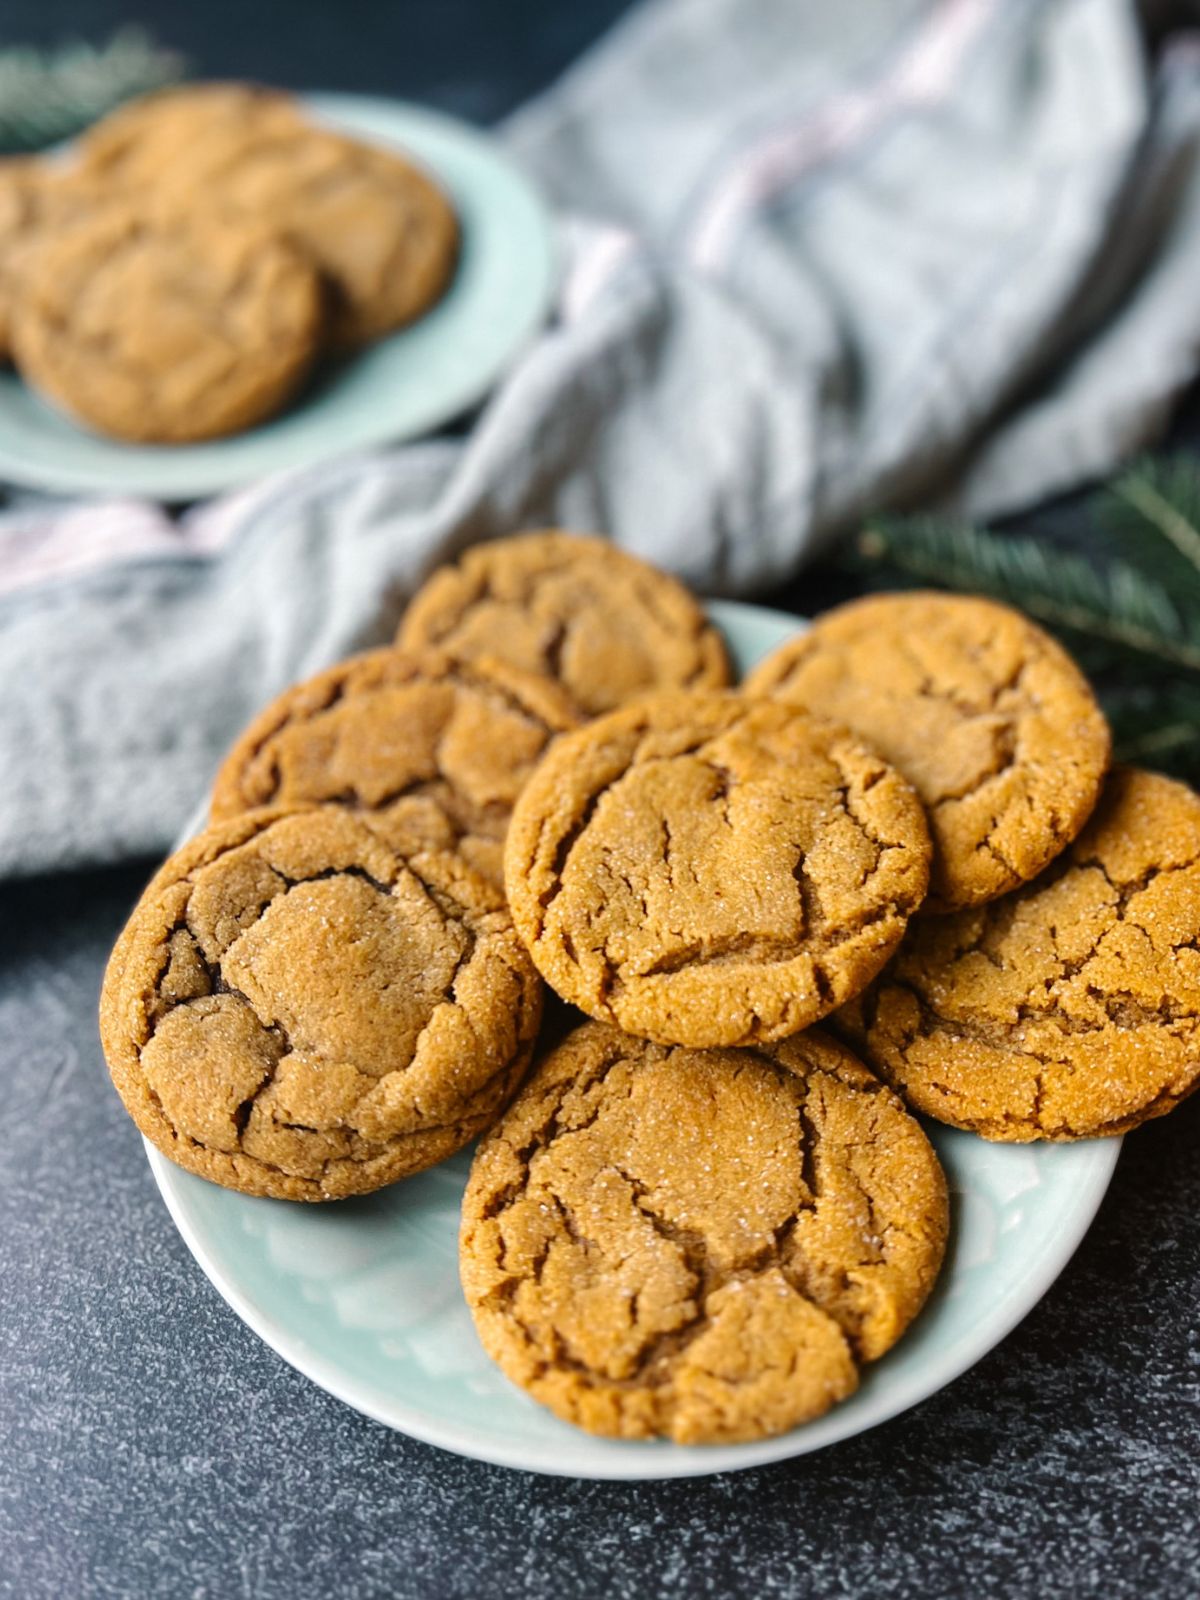 Soft and chewy ginger snap cookies on a plate with a towel between another plate of ginger snap cookies in the background.